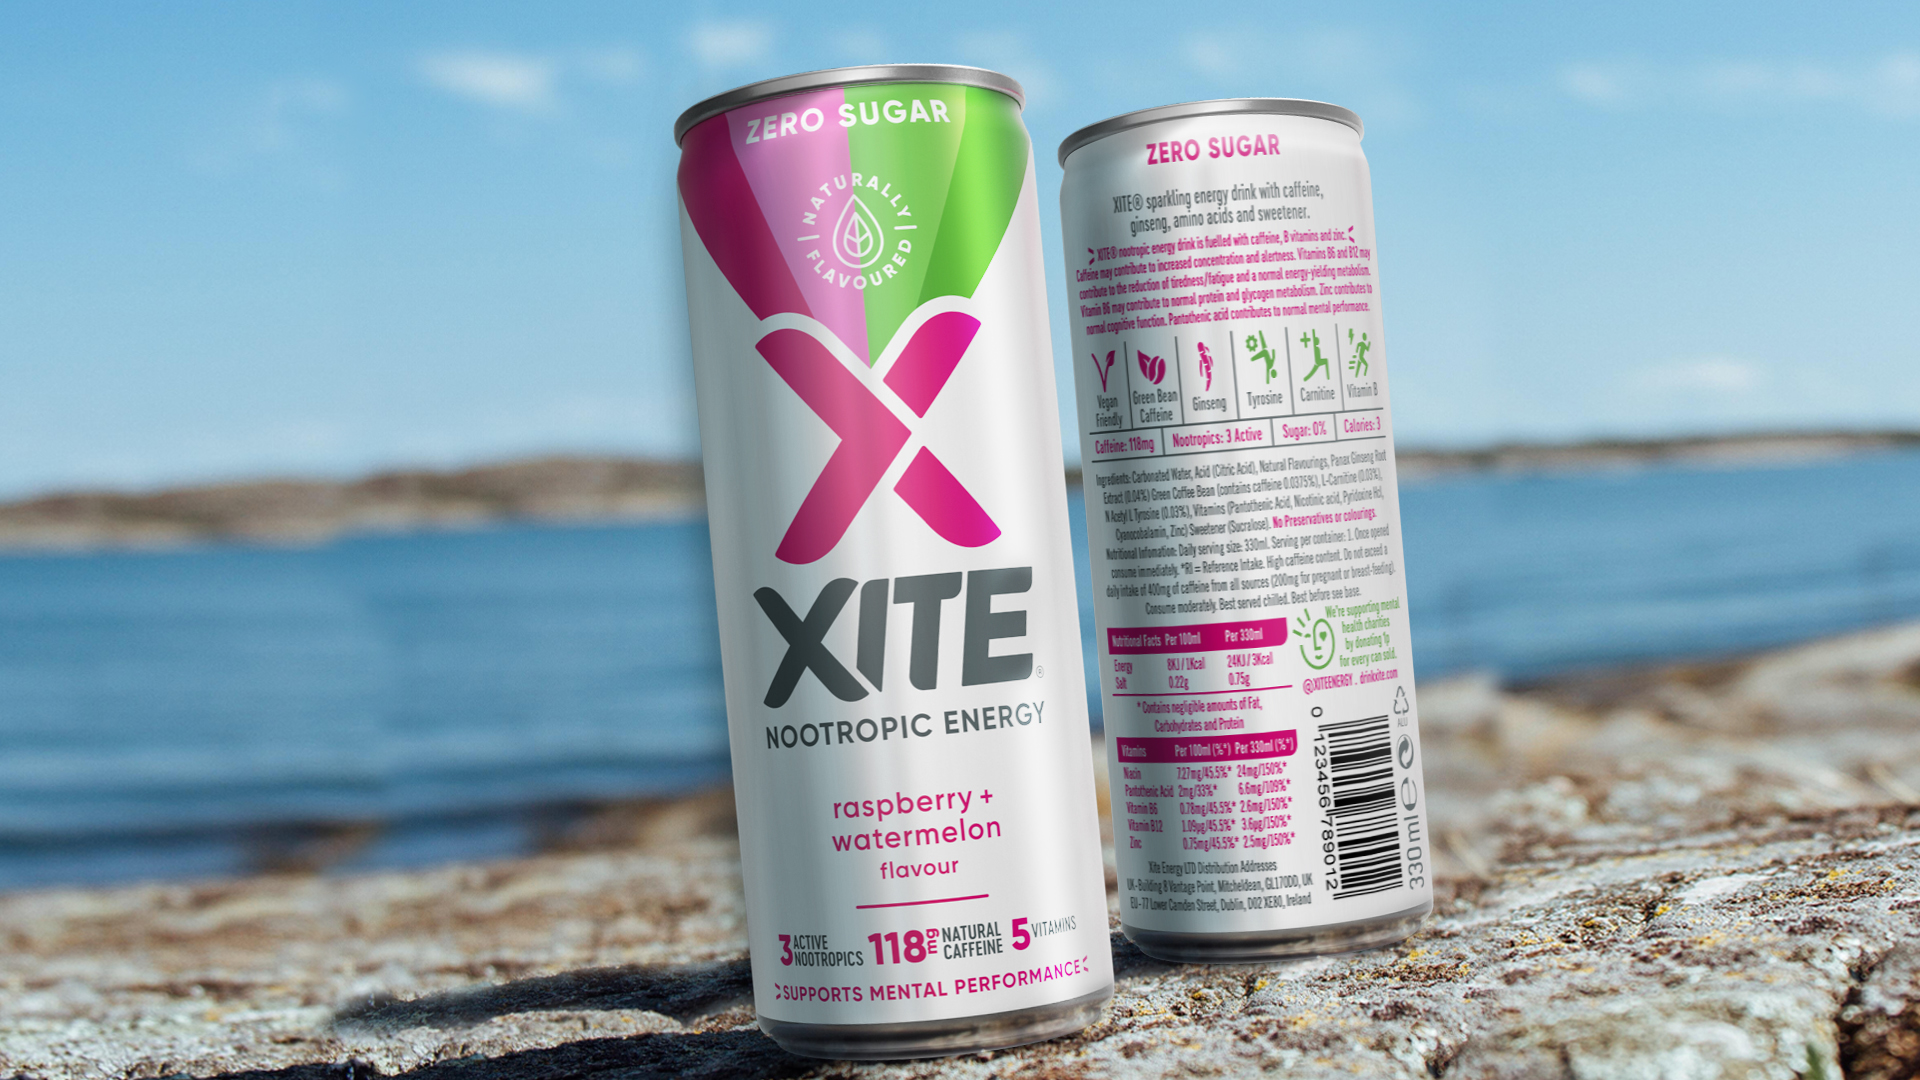 XITE-ing Redesign for Nootropics Energy Drink Brand by Brandon